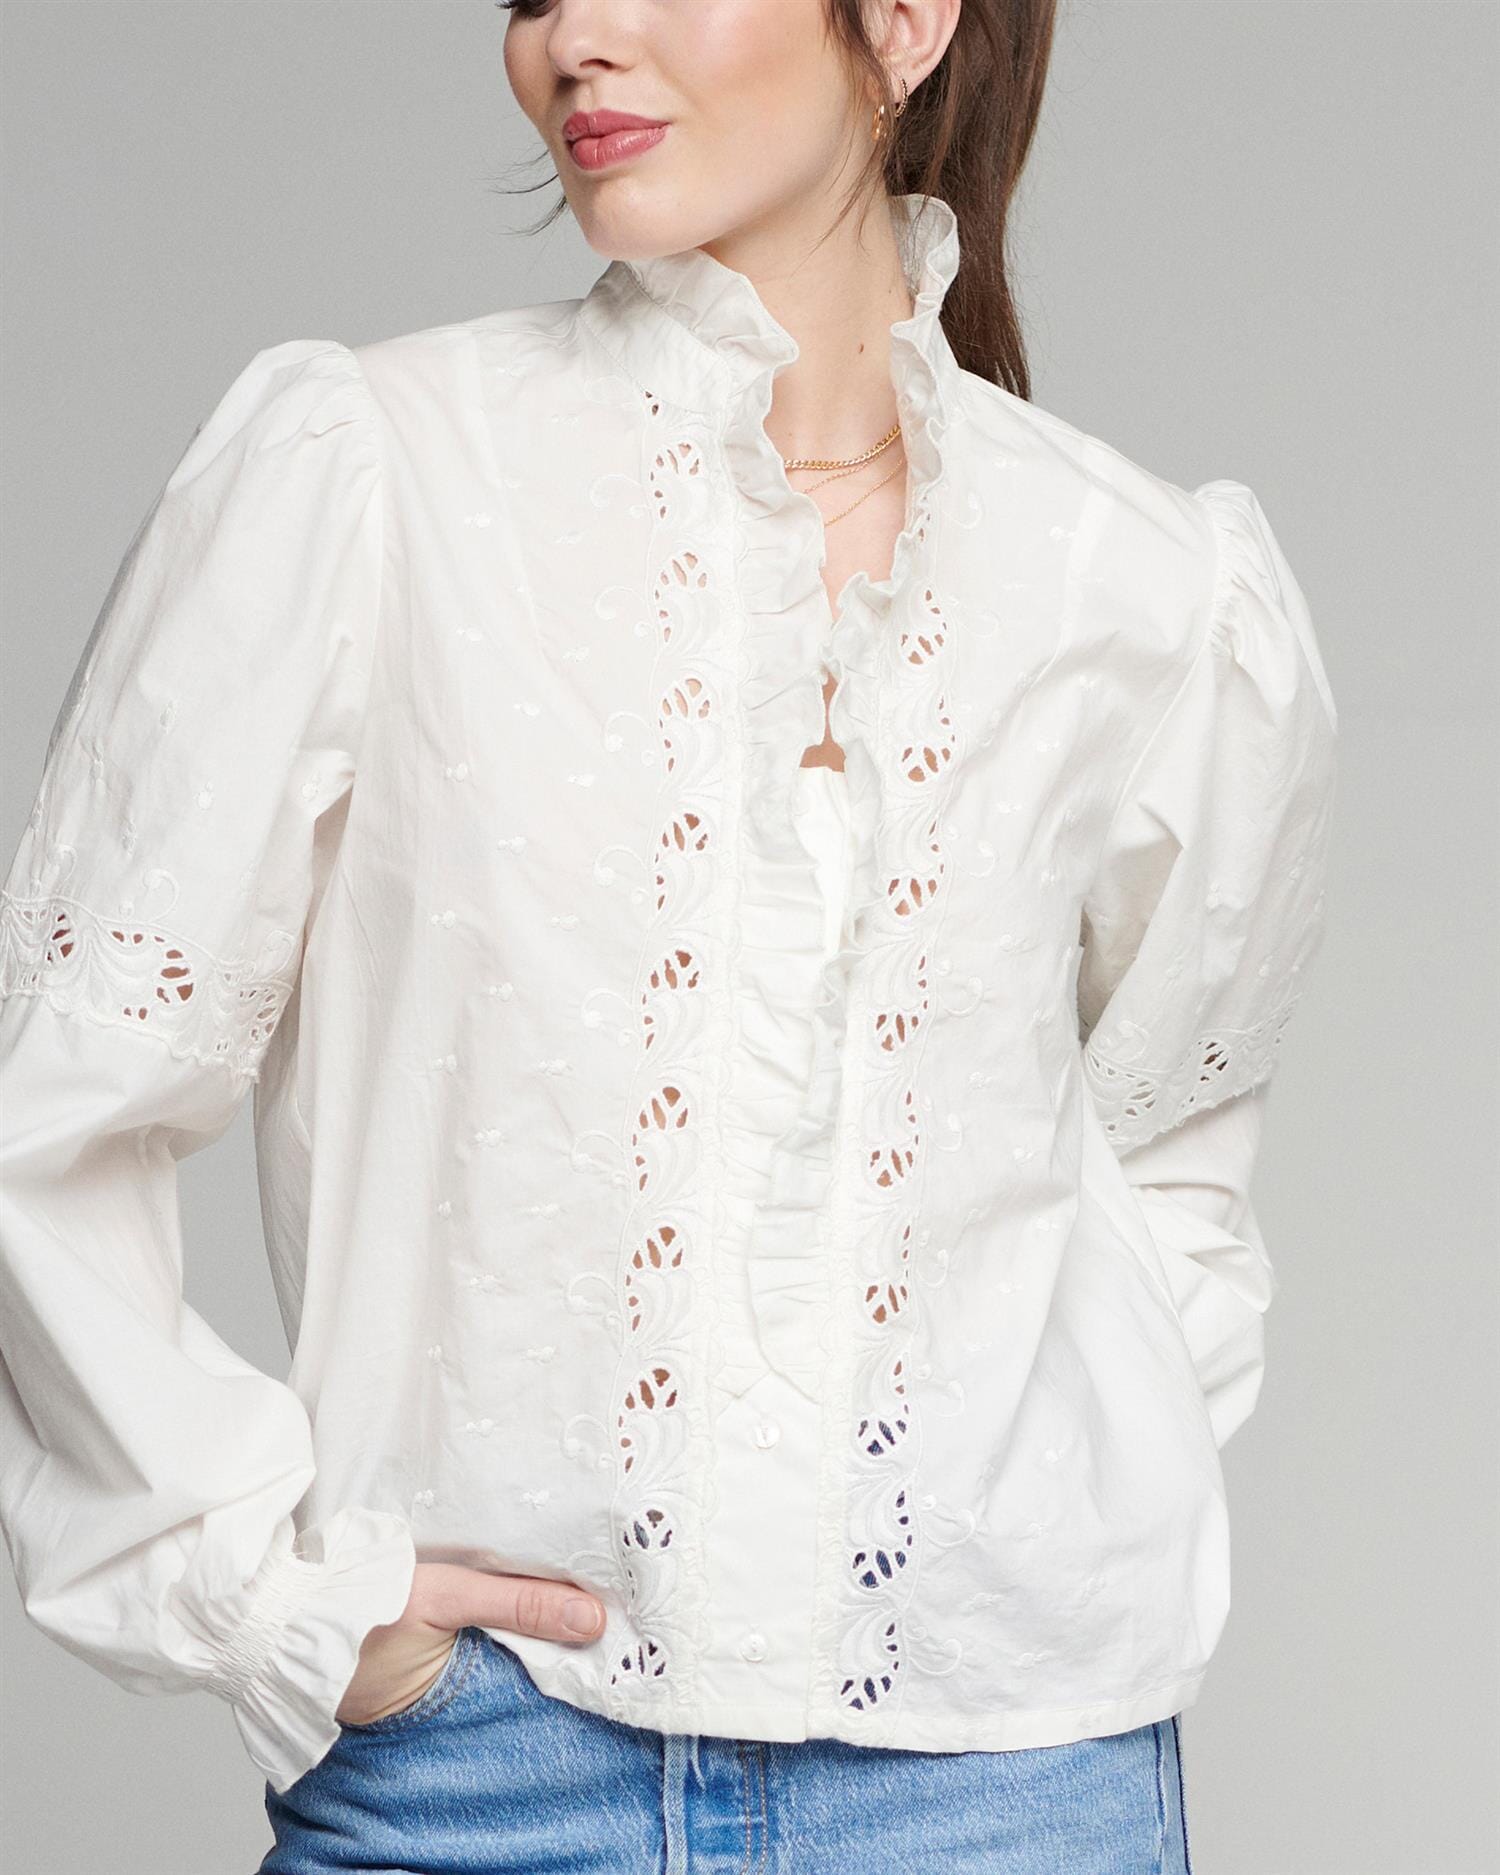 Pia Tjelta May White Bluse